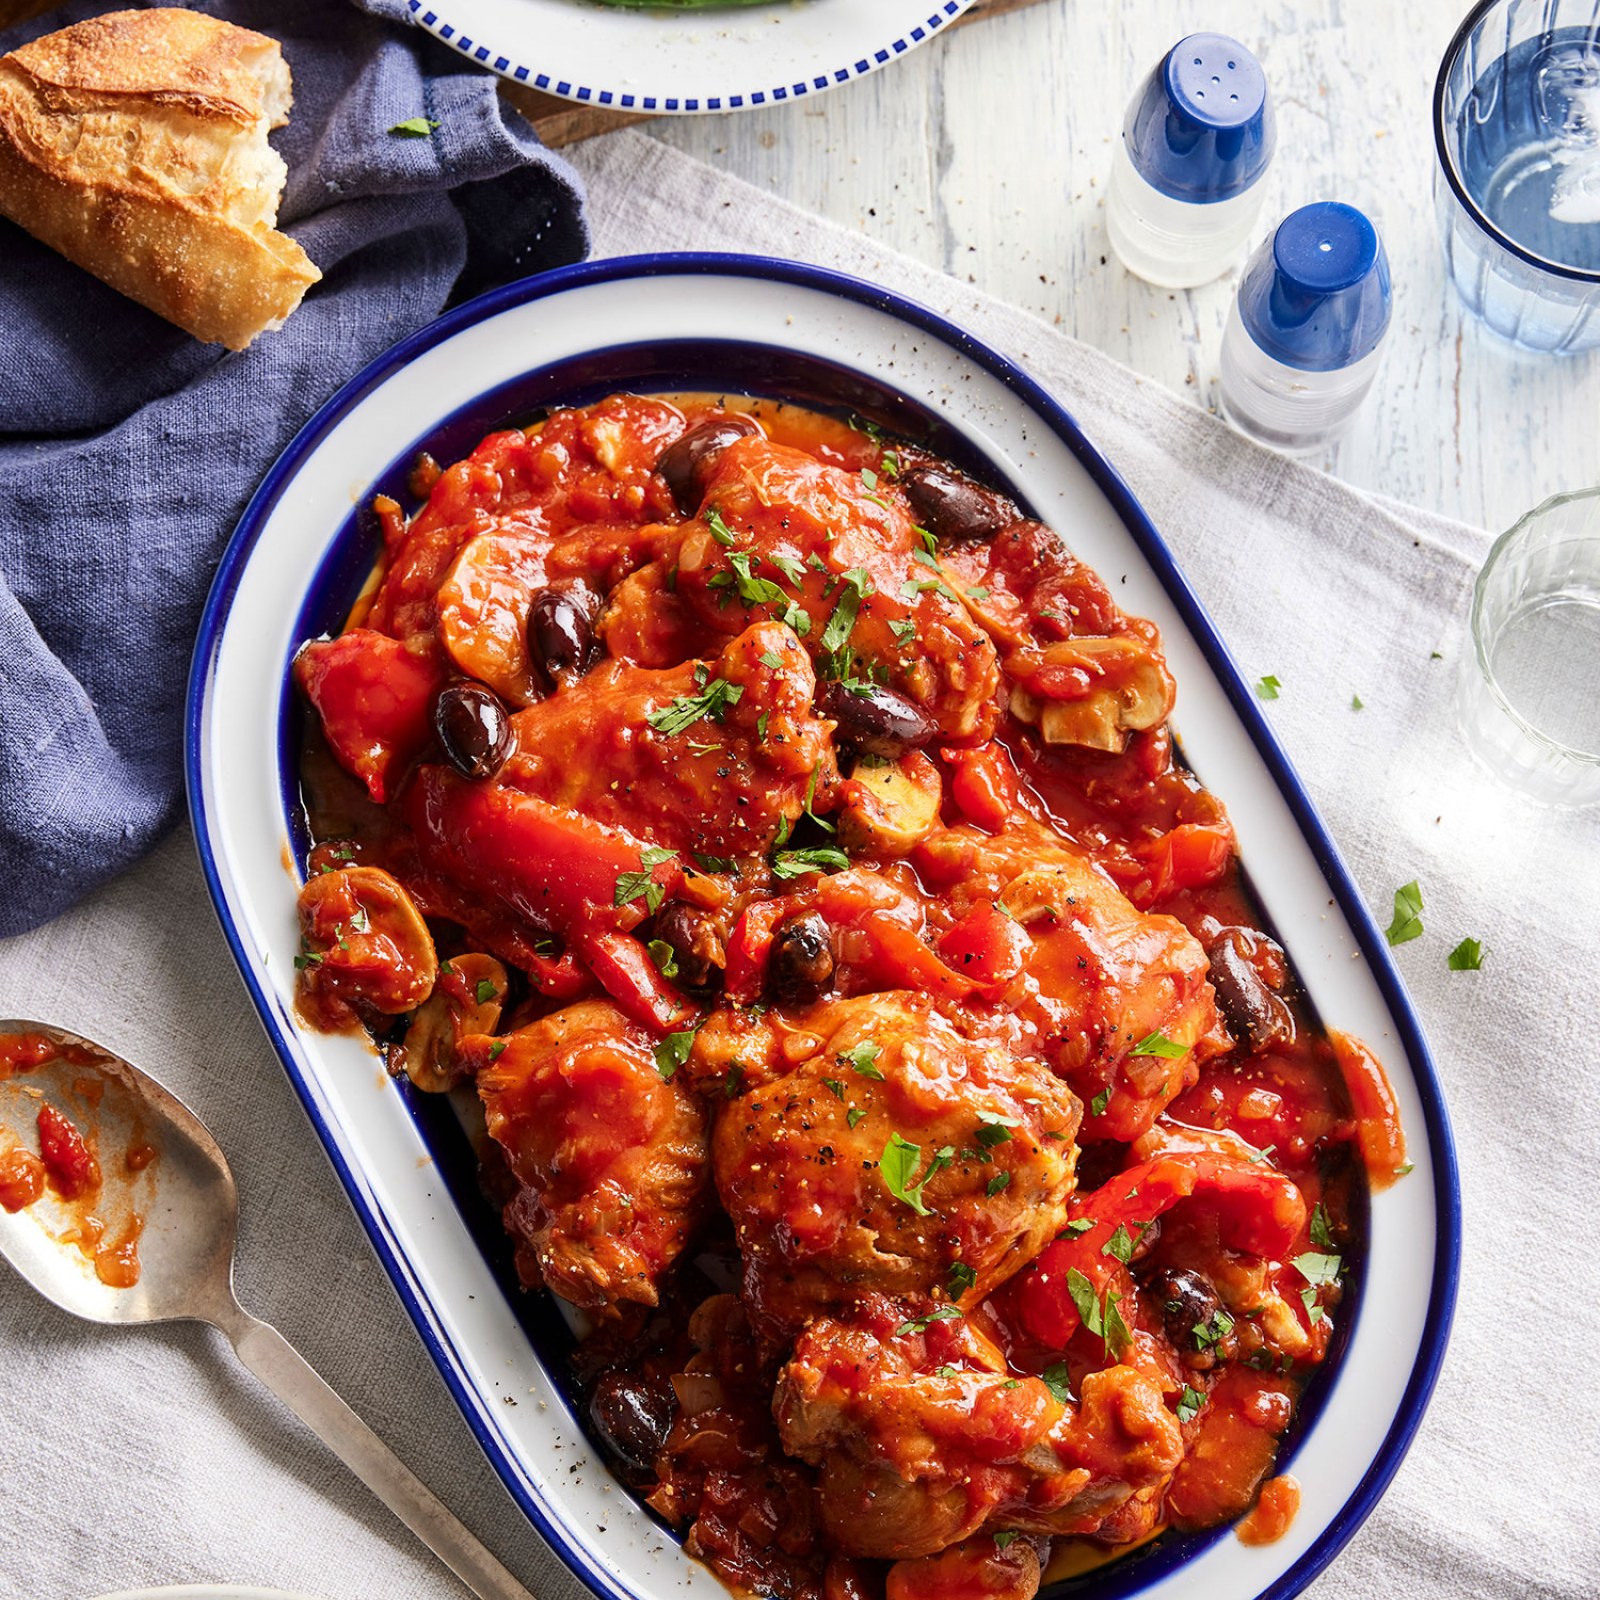 https://myfoodbook.com.au/sites/default/files/styles/1x1/public/recipe_photo/whisk_rosella_slow_cooker_chicken_cacciatore_web.jpg